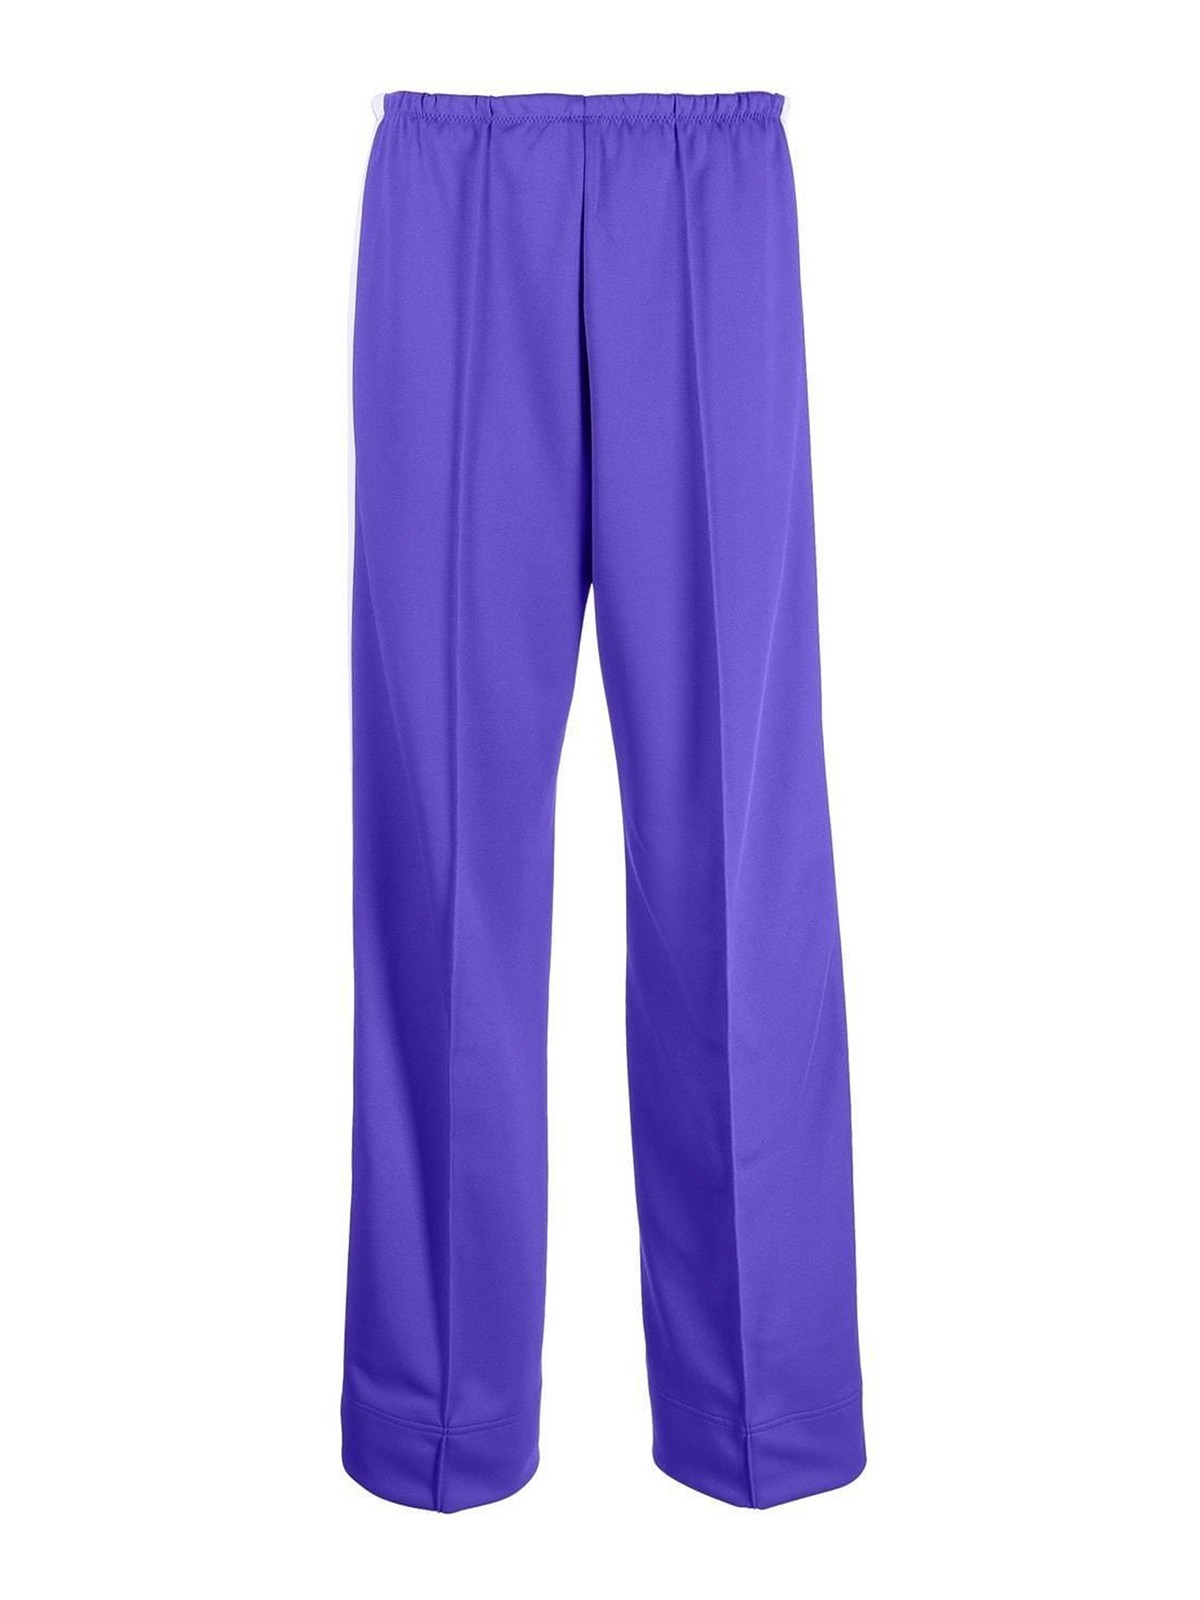 side-stripe track pants in purple - Palm Angels® Official